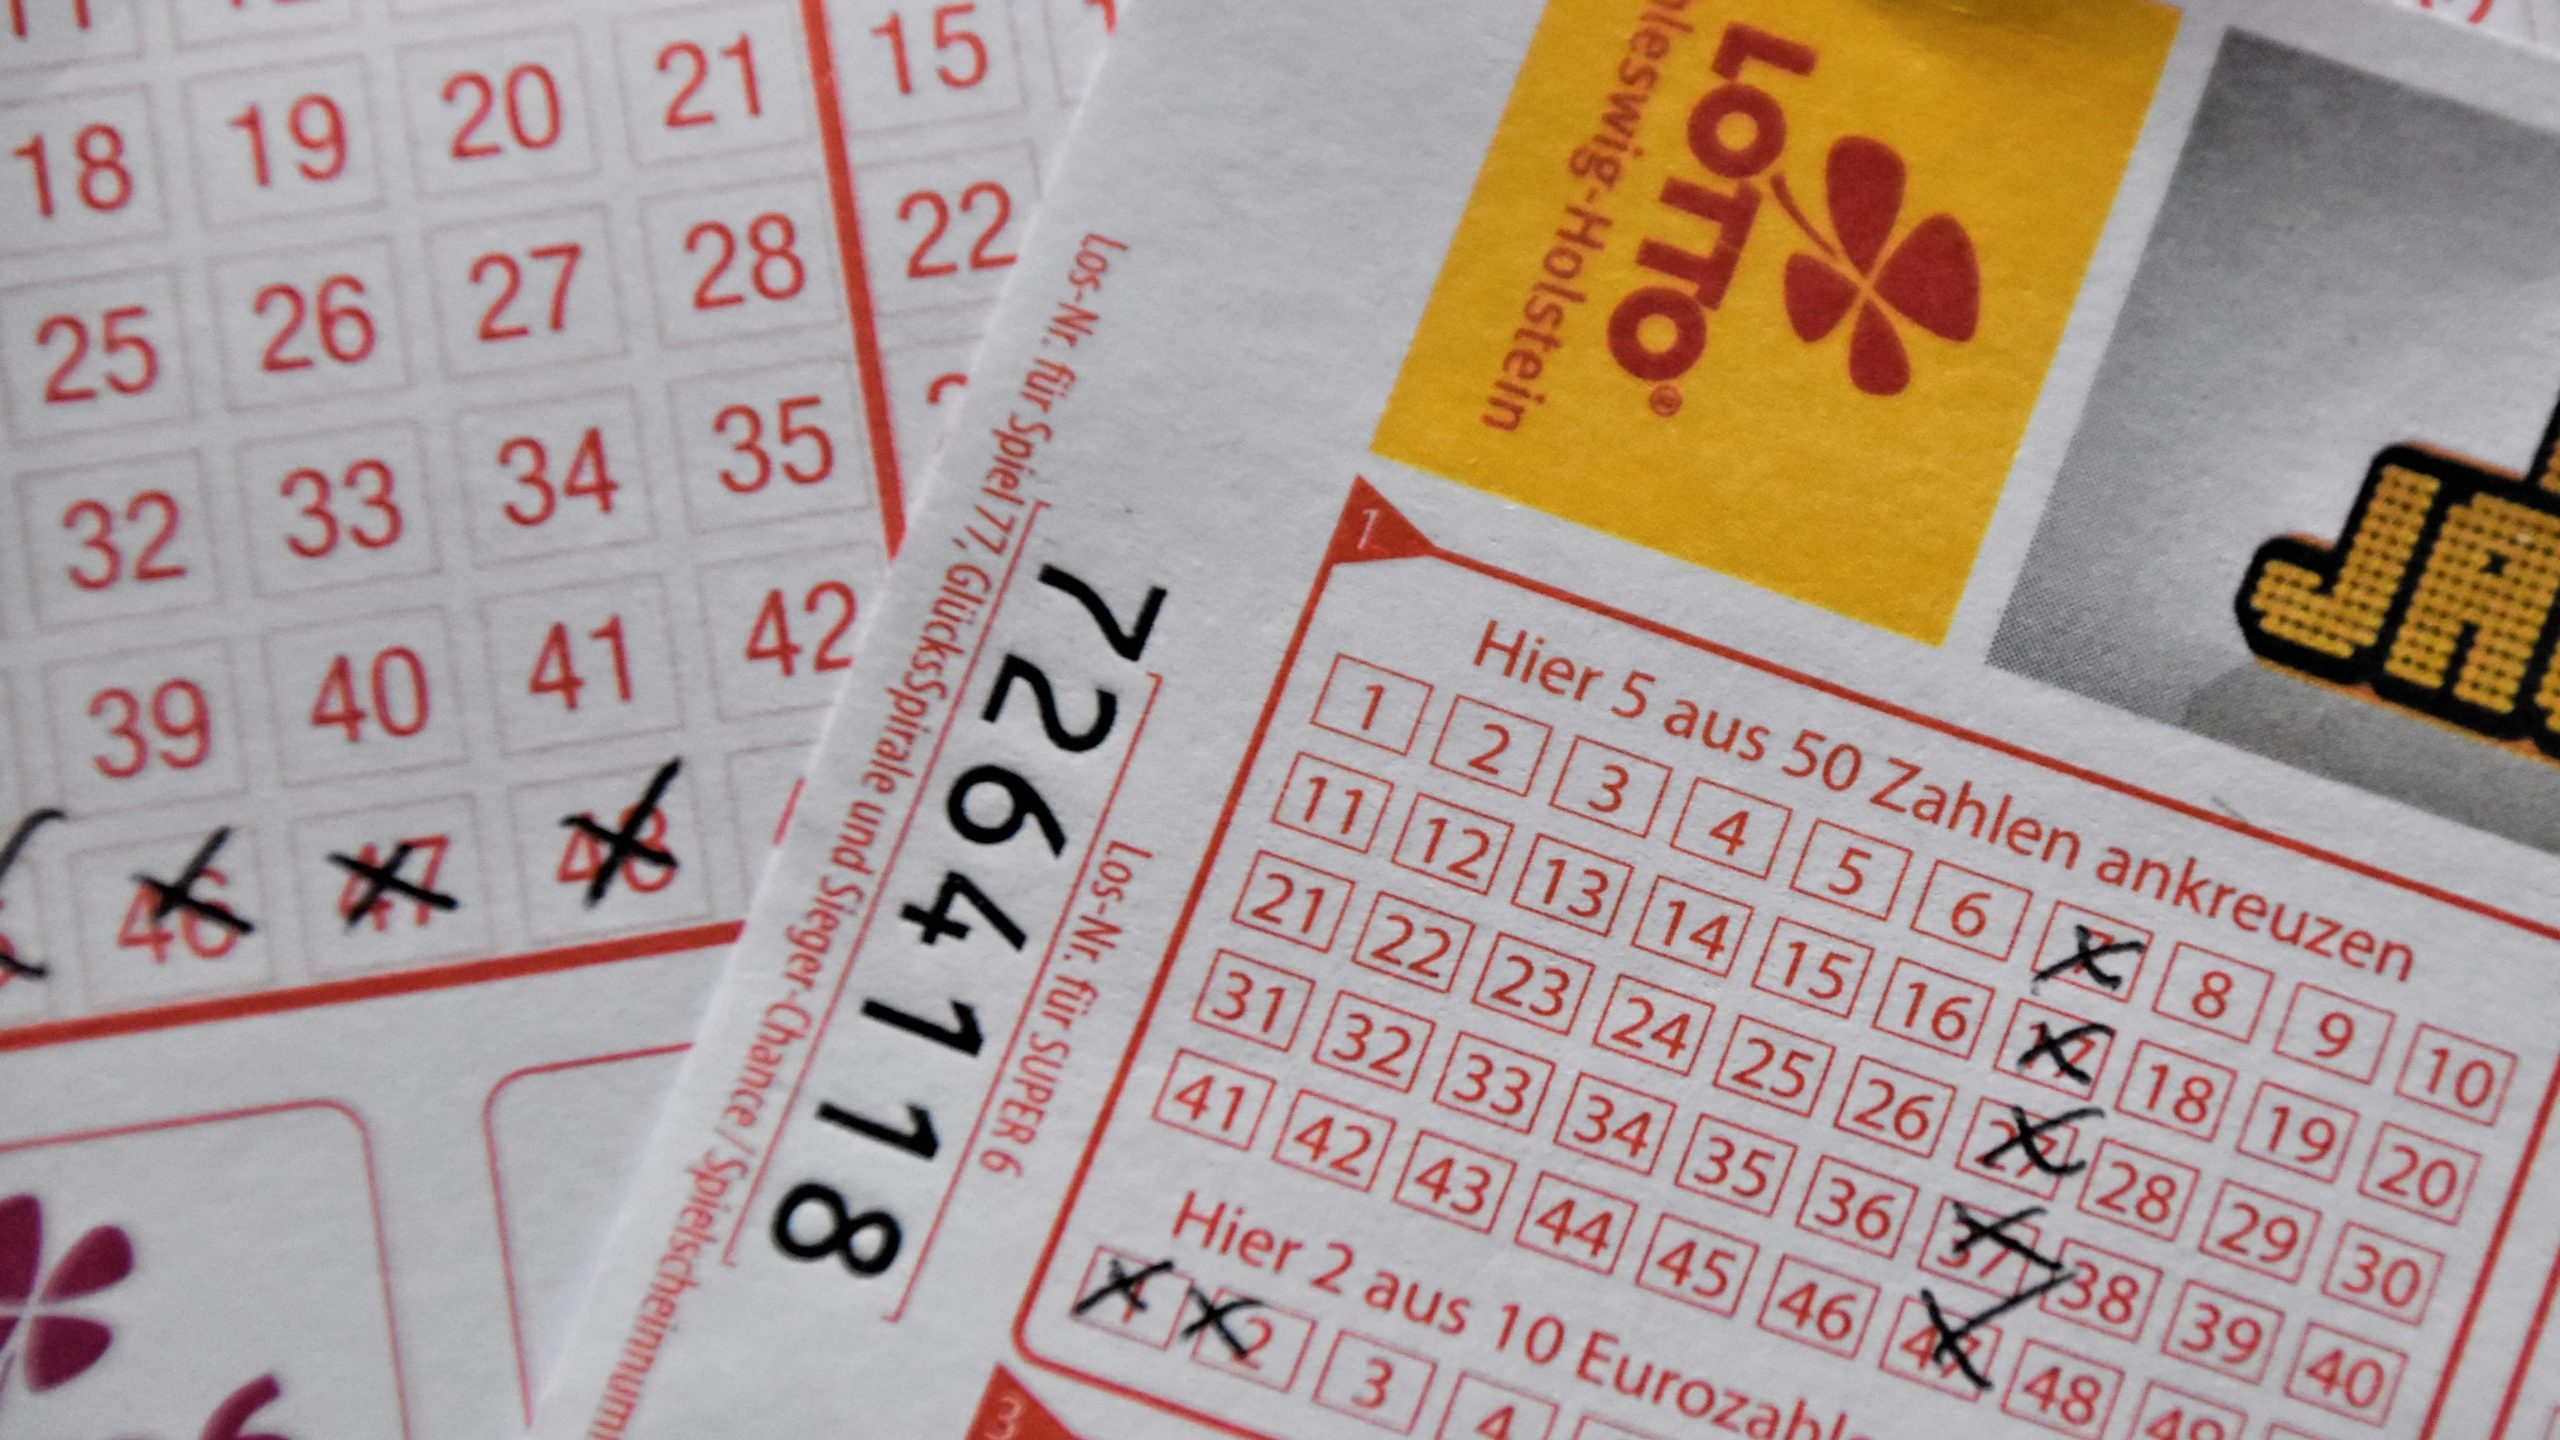 Mega Millions jackpot: A look at top 5 lottery prizes ever won so far